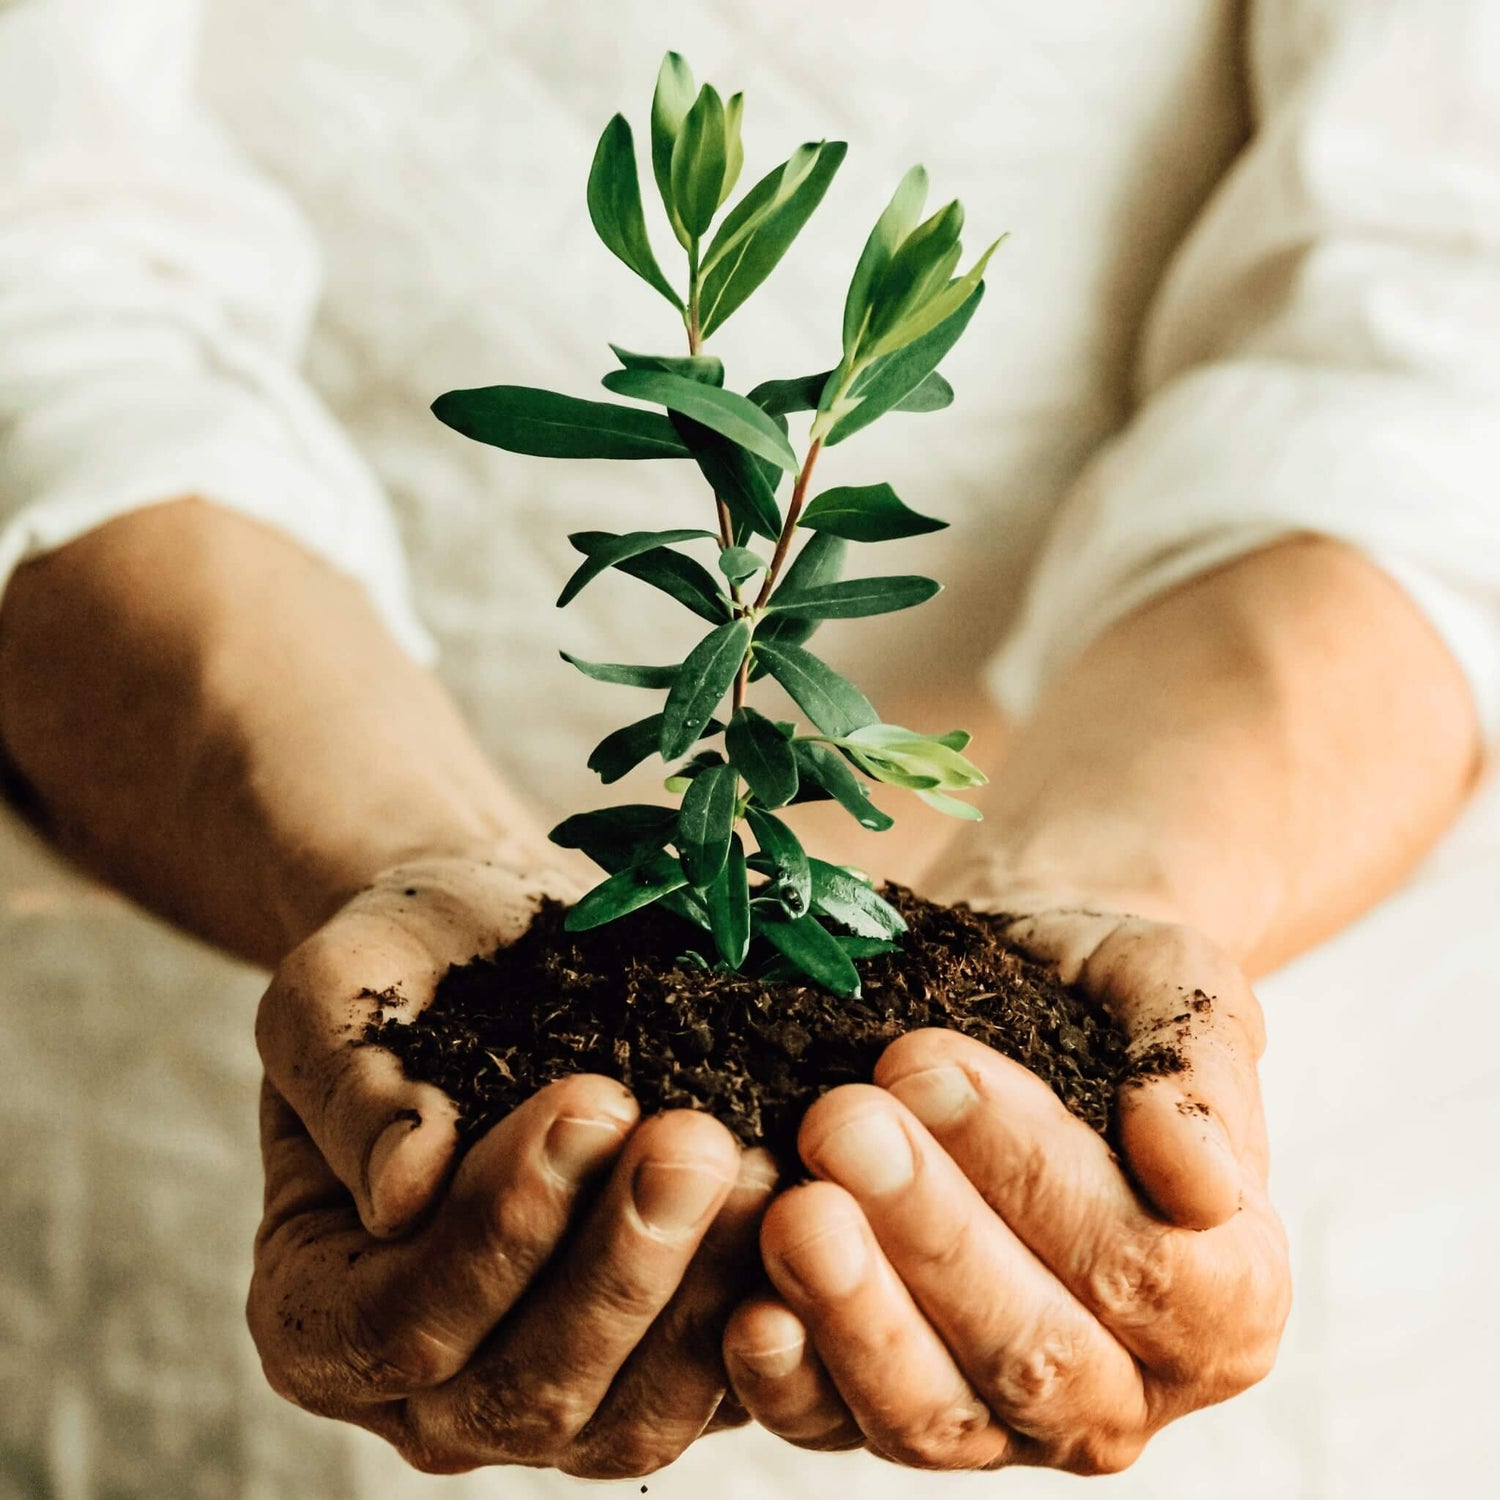 hands holding soil and green plant